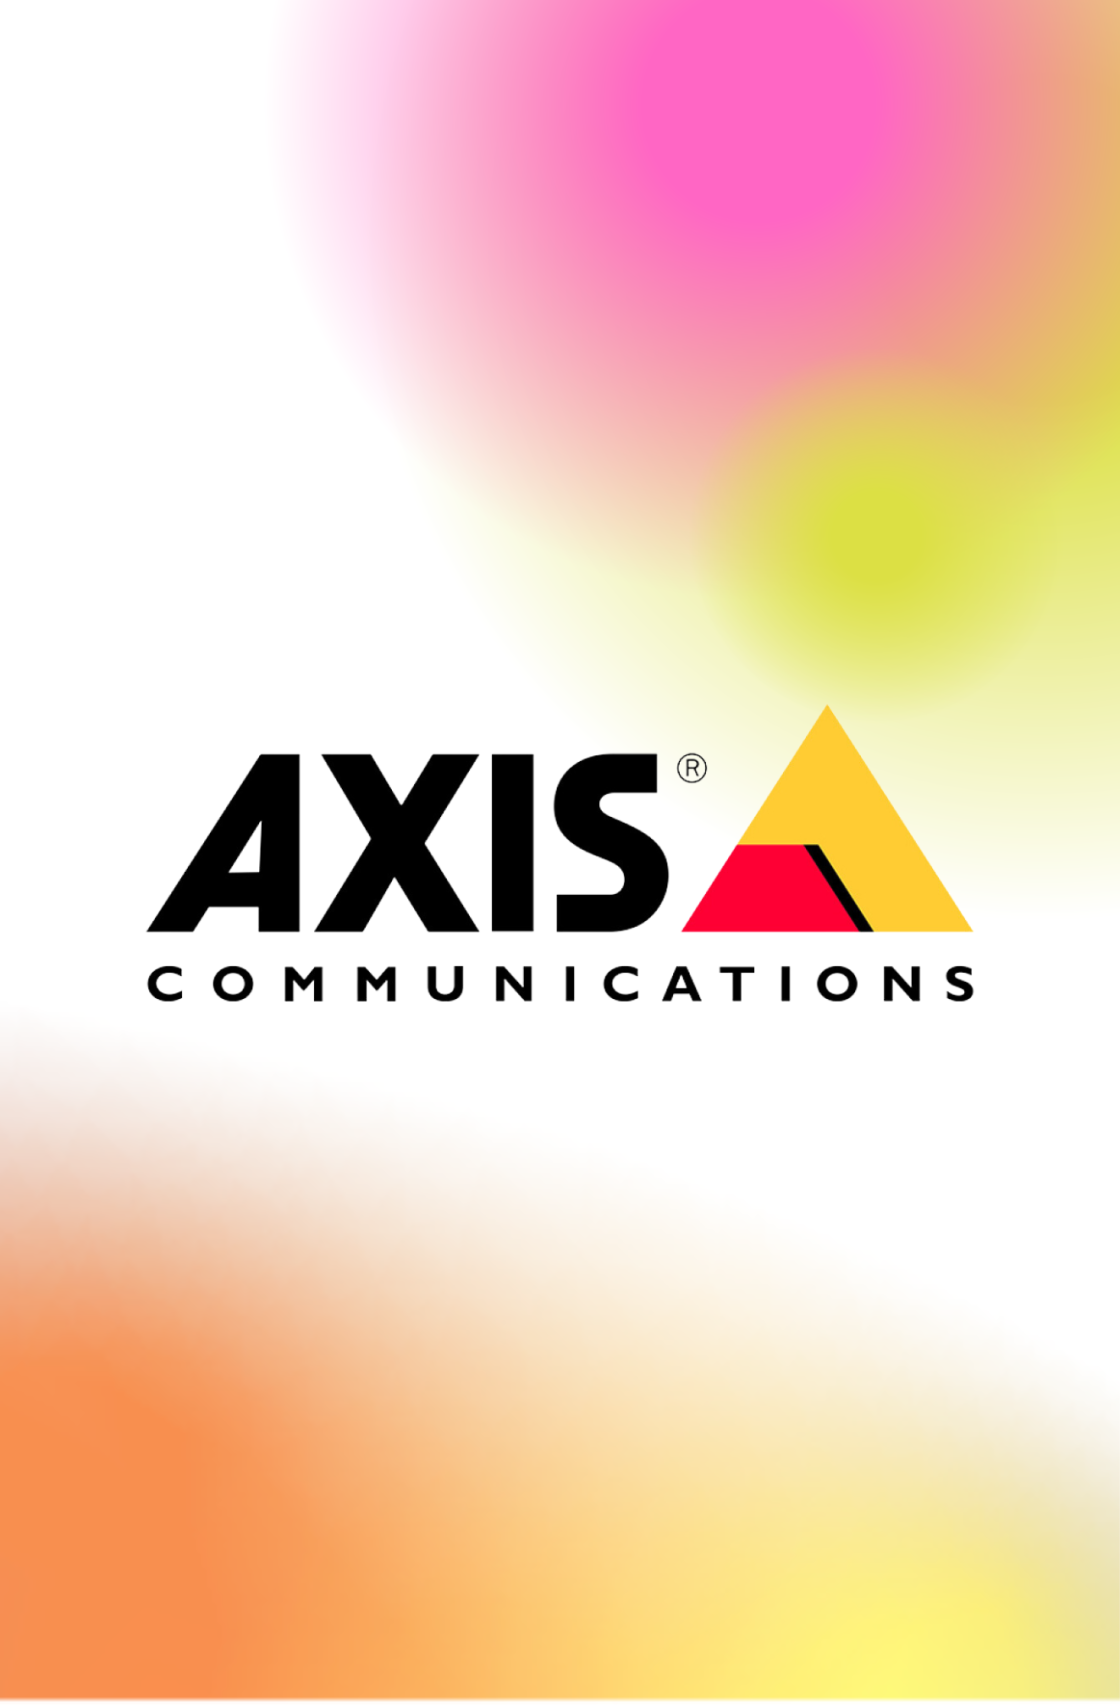 Axis uses augmented reality for training